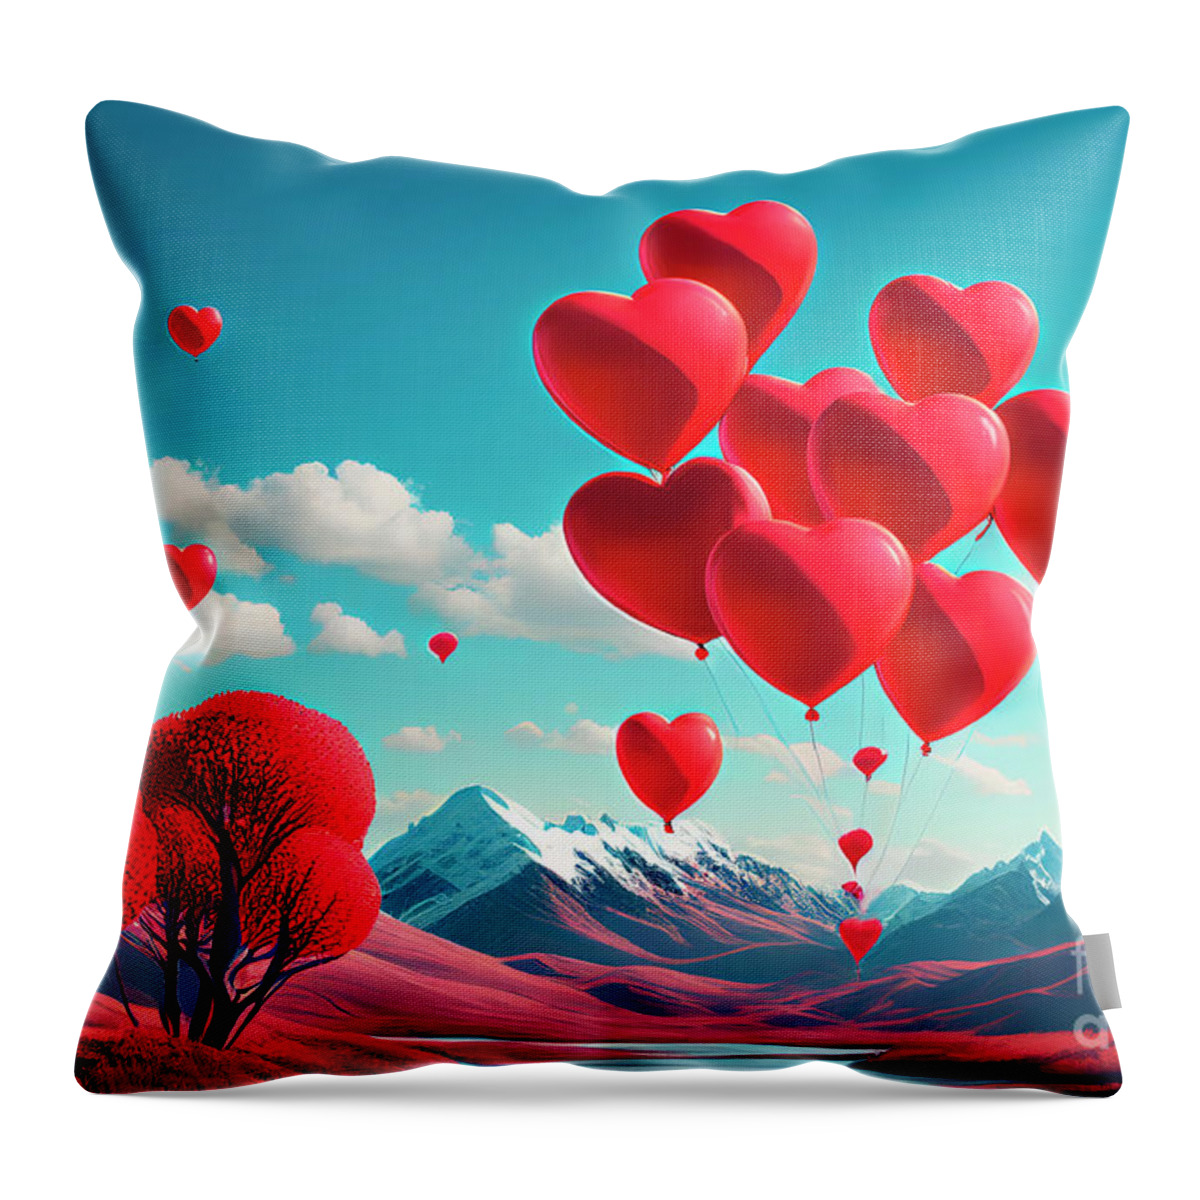 Heart Throw Pillow featuring the digital art Heart shape balloons flying in the sky by Jelena Jovanovic